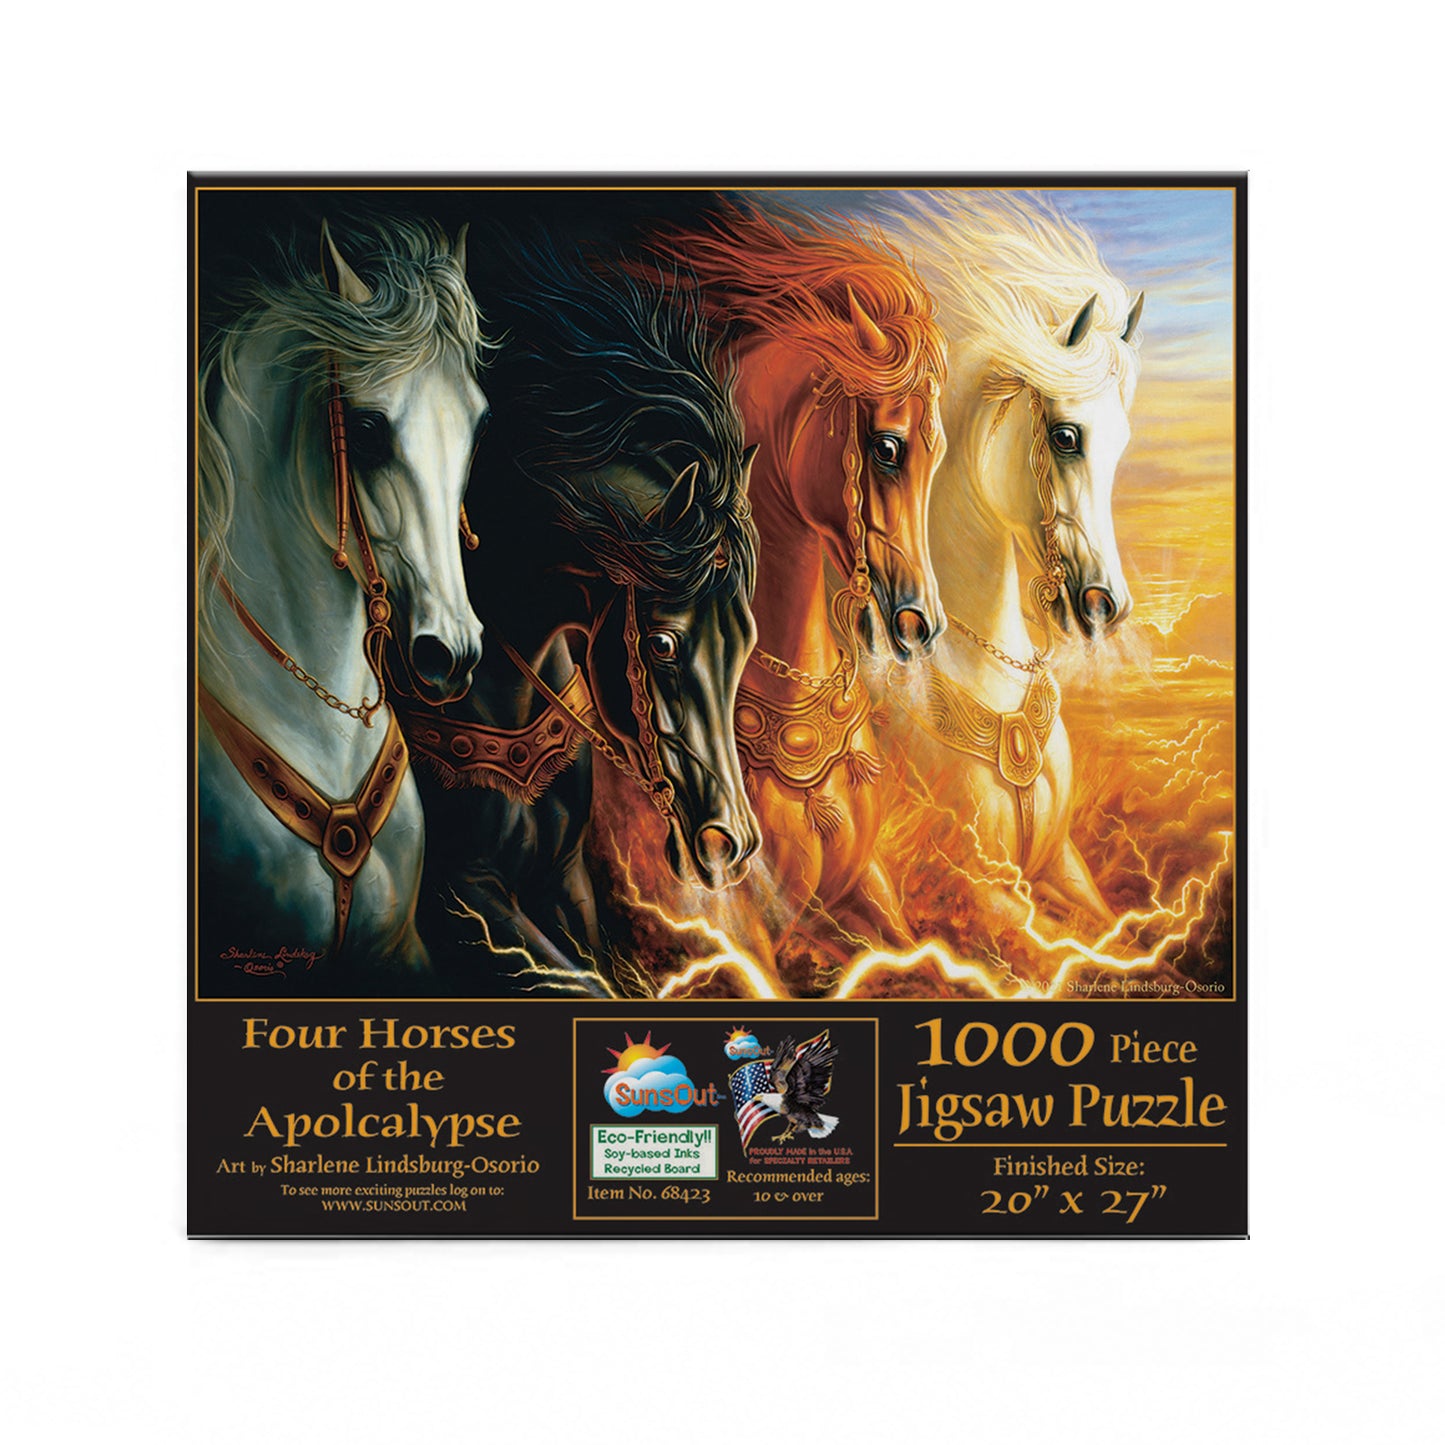 Four Horses of the Apocalypse - 1000 Piece Jigsaw Puzzle